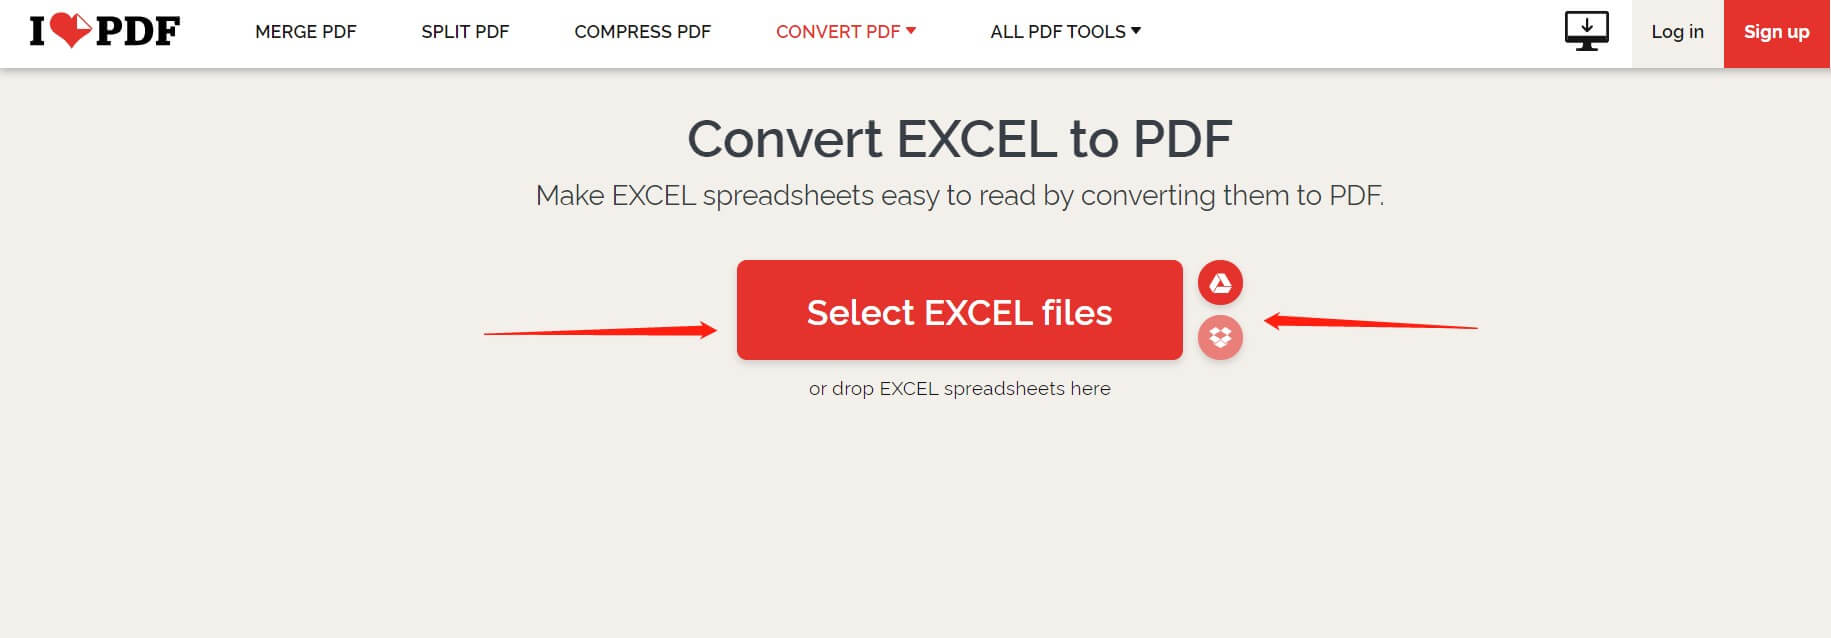 how to save excel as pdf in iLovePDF Step1